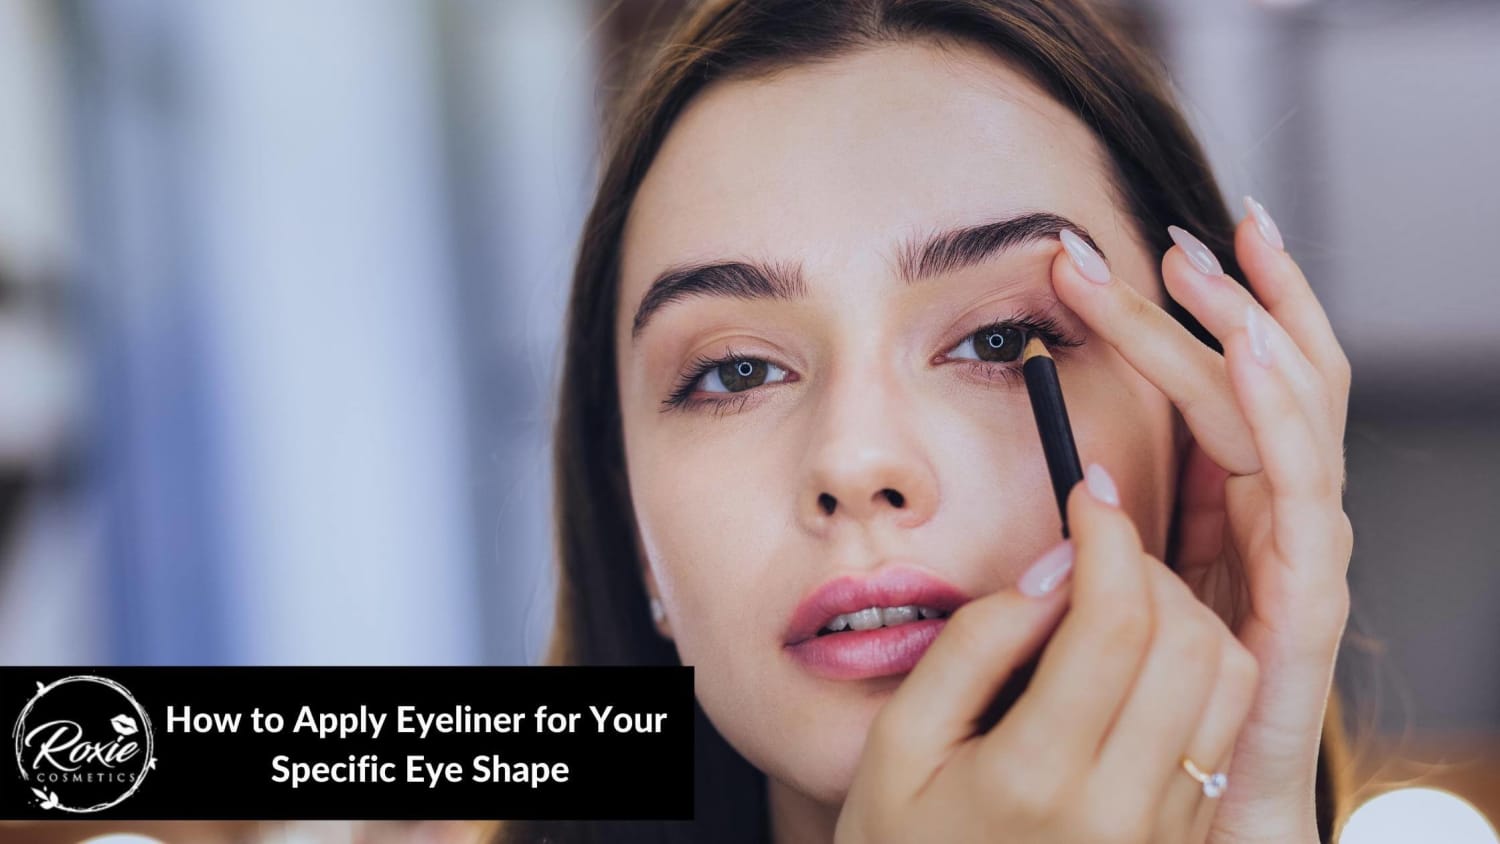 How to Apply Eyeliner for Your Specific Eye Shape